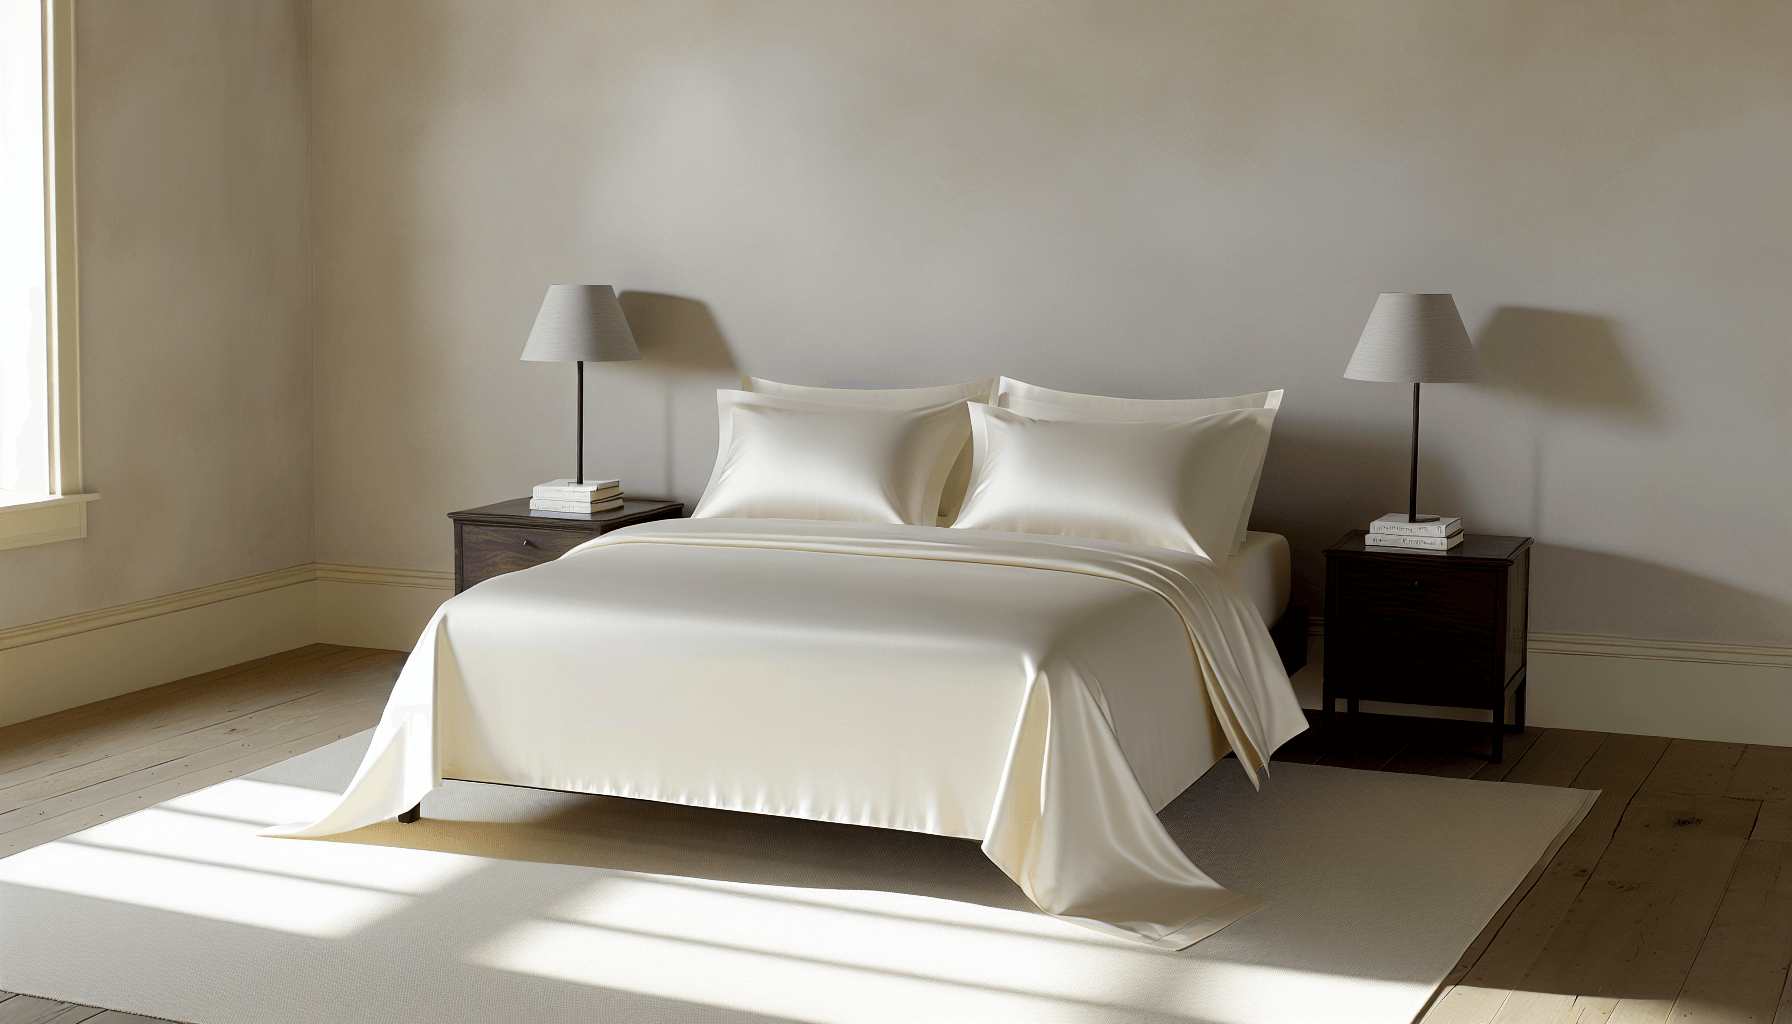 Ivory colored bamboo sheets on a bed